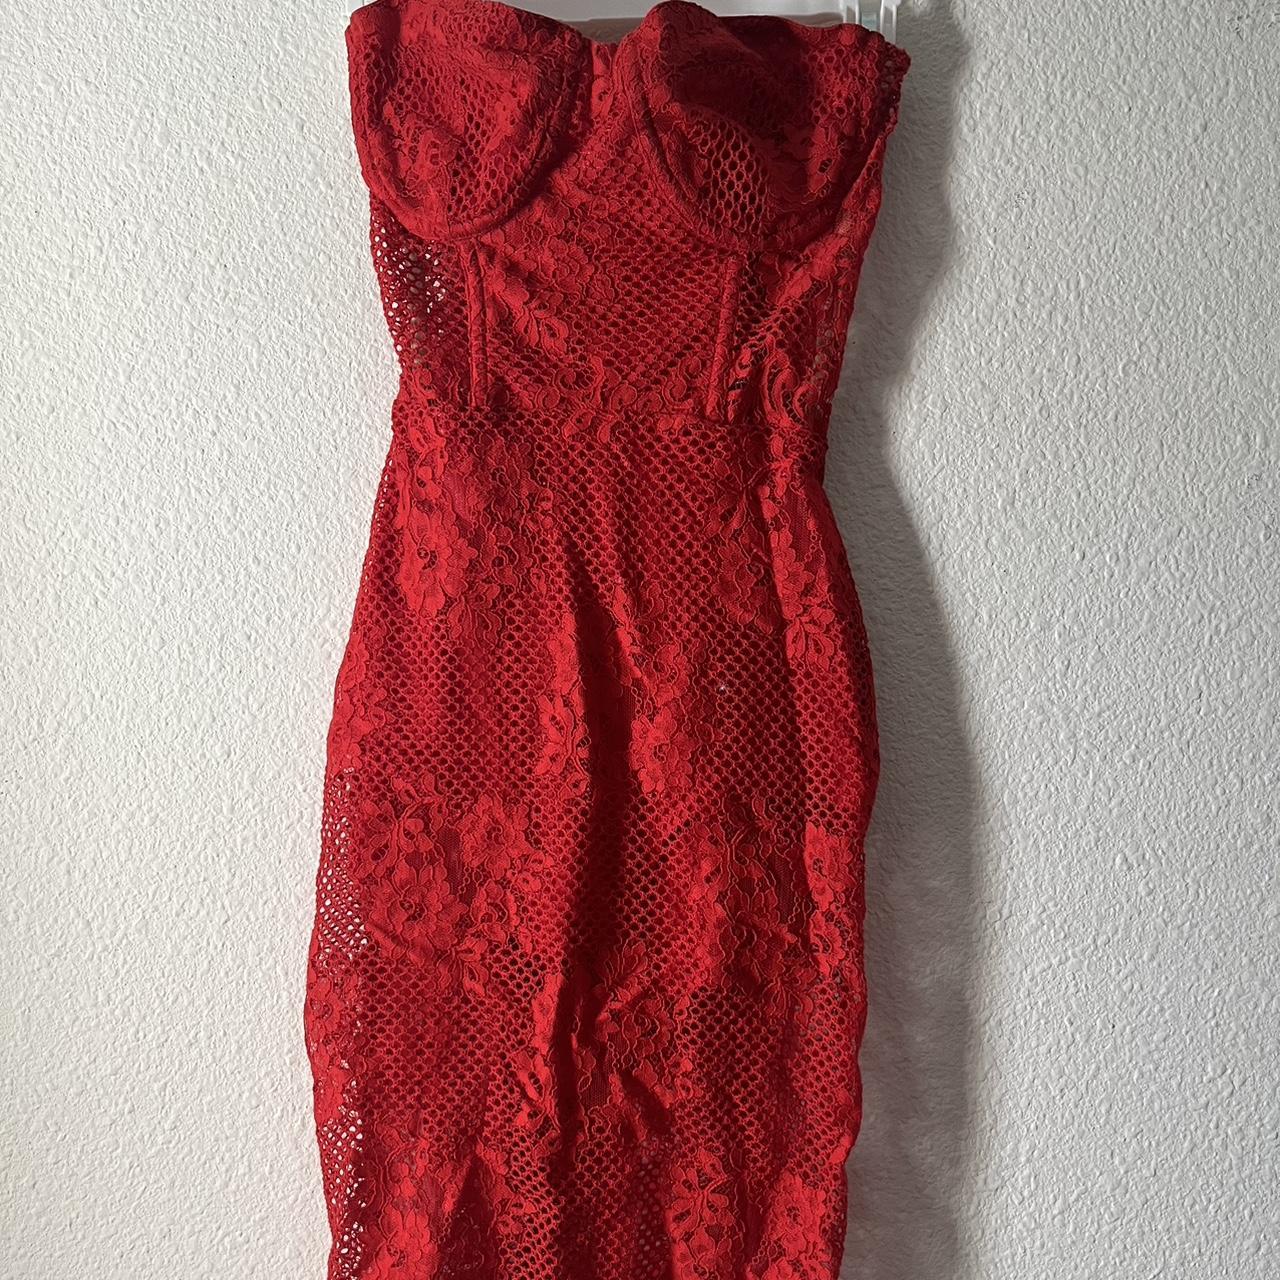 FOR LOVE AND LEMONS AUTHENTIC GIANNA DRESS. Bought - Depop